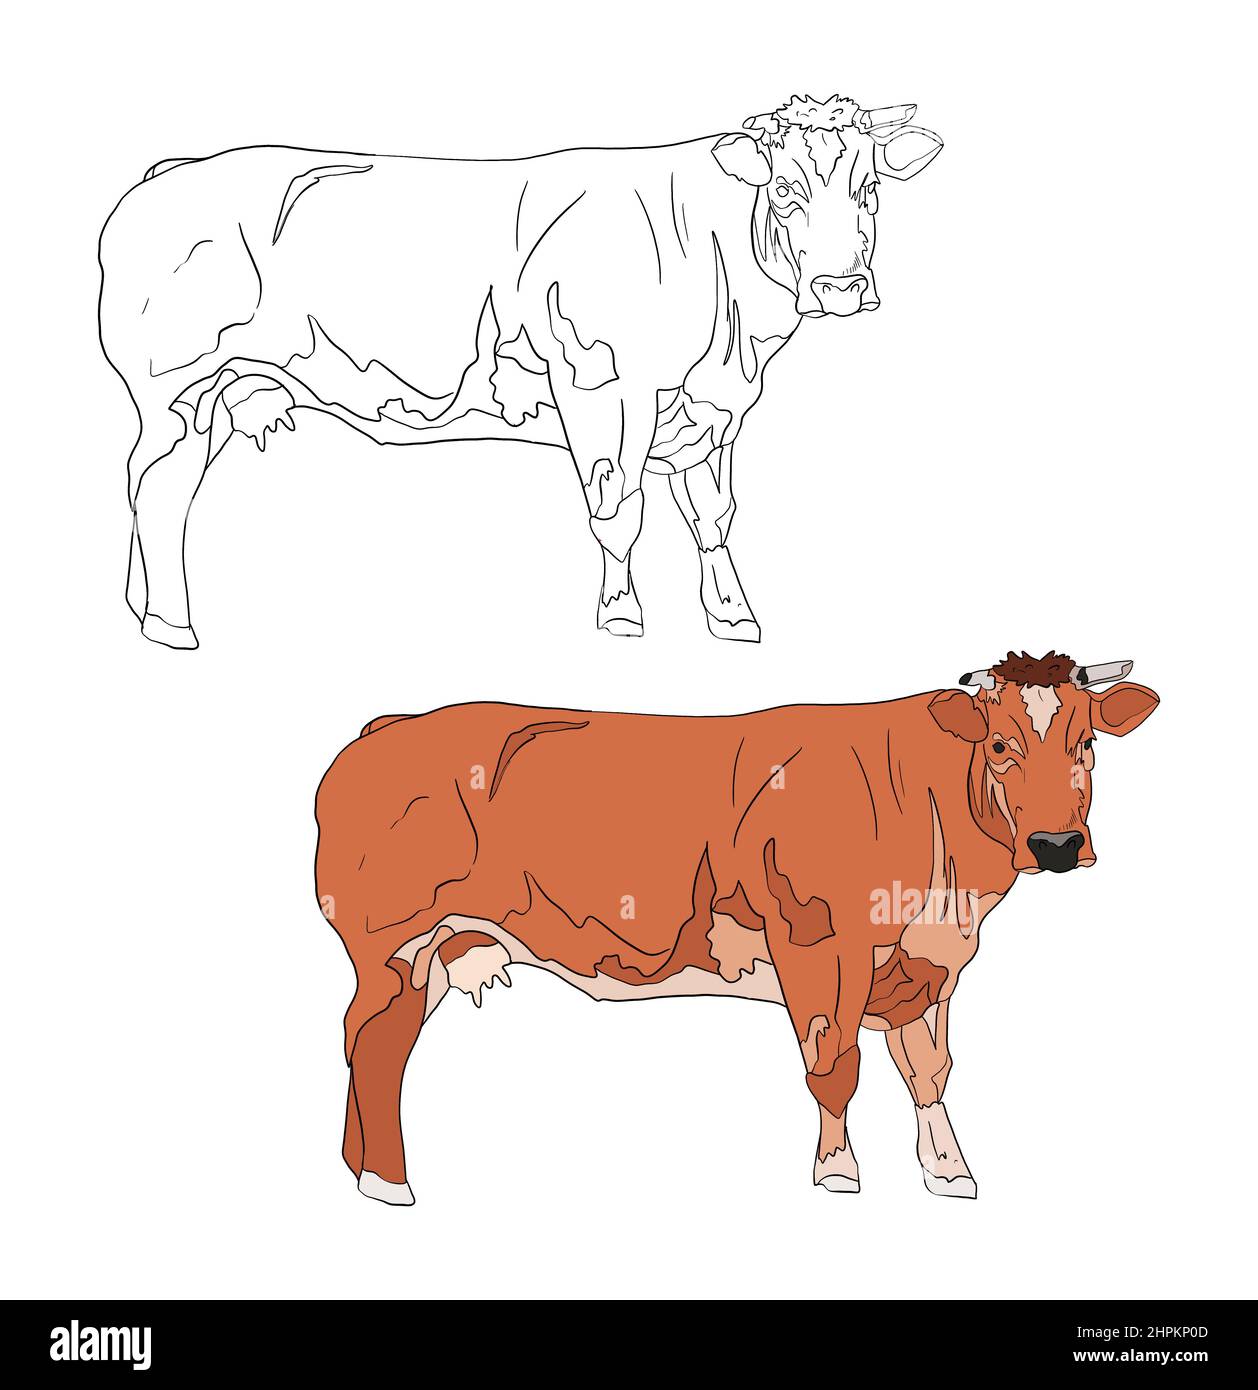 Illustration for a coloring book in color and black and white. Drawing of a cow on a white isolated background. High quality illustration Stock Photo